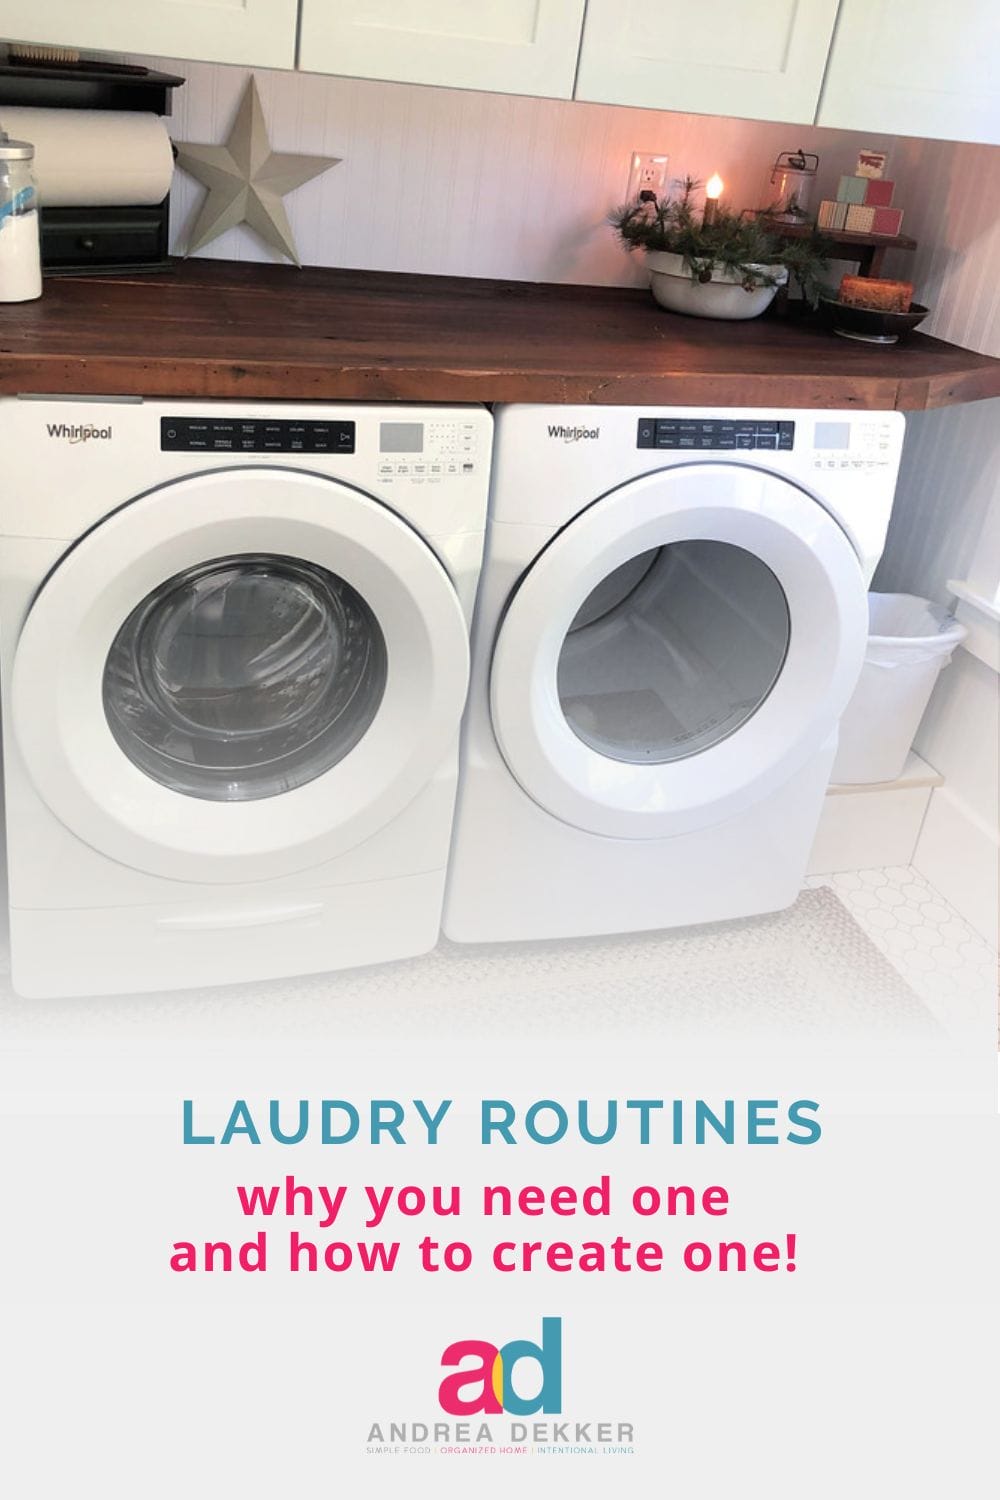 Do you have a laundry routine? If not... you need one! Here's how to create a routine that works for YOUR life + my favorite laundry tips and tools. via @andreadekker